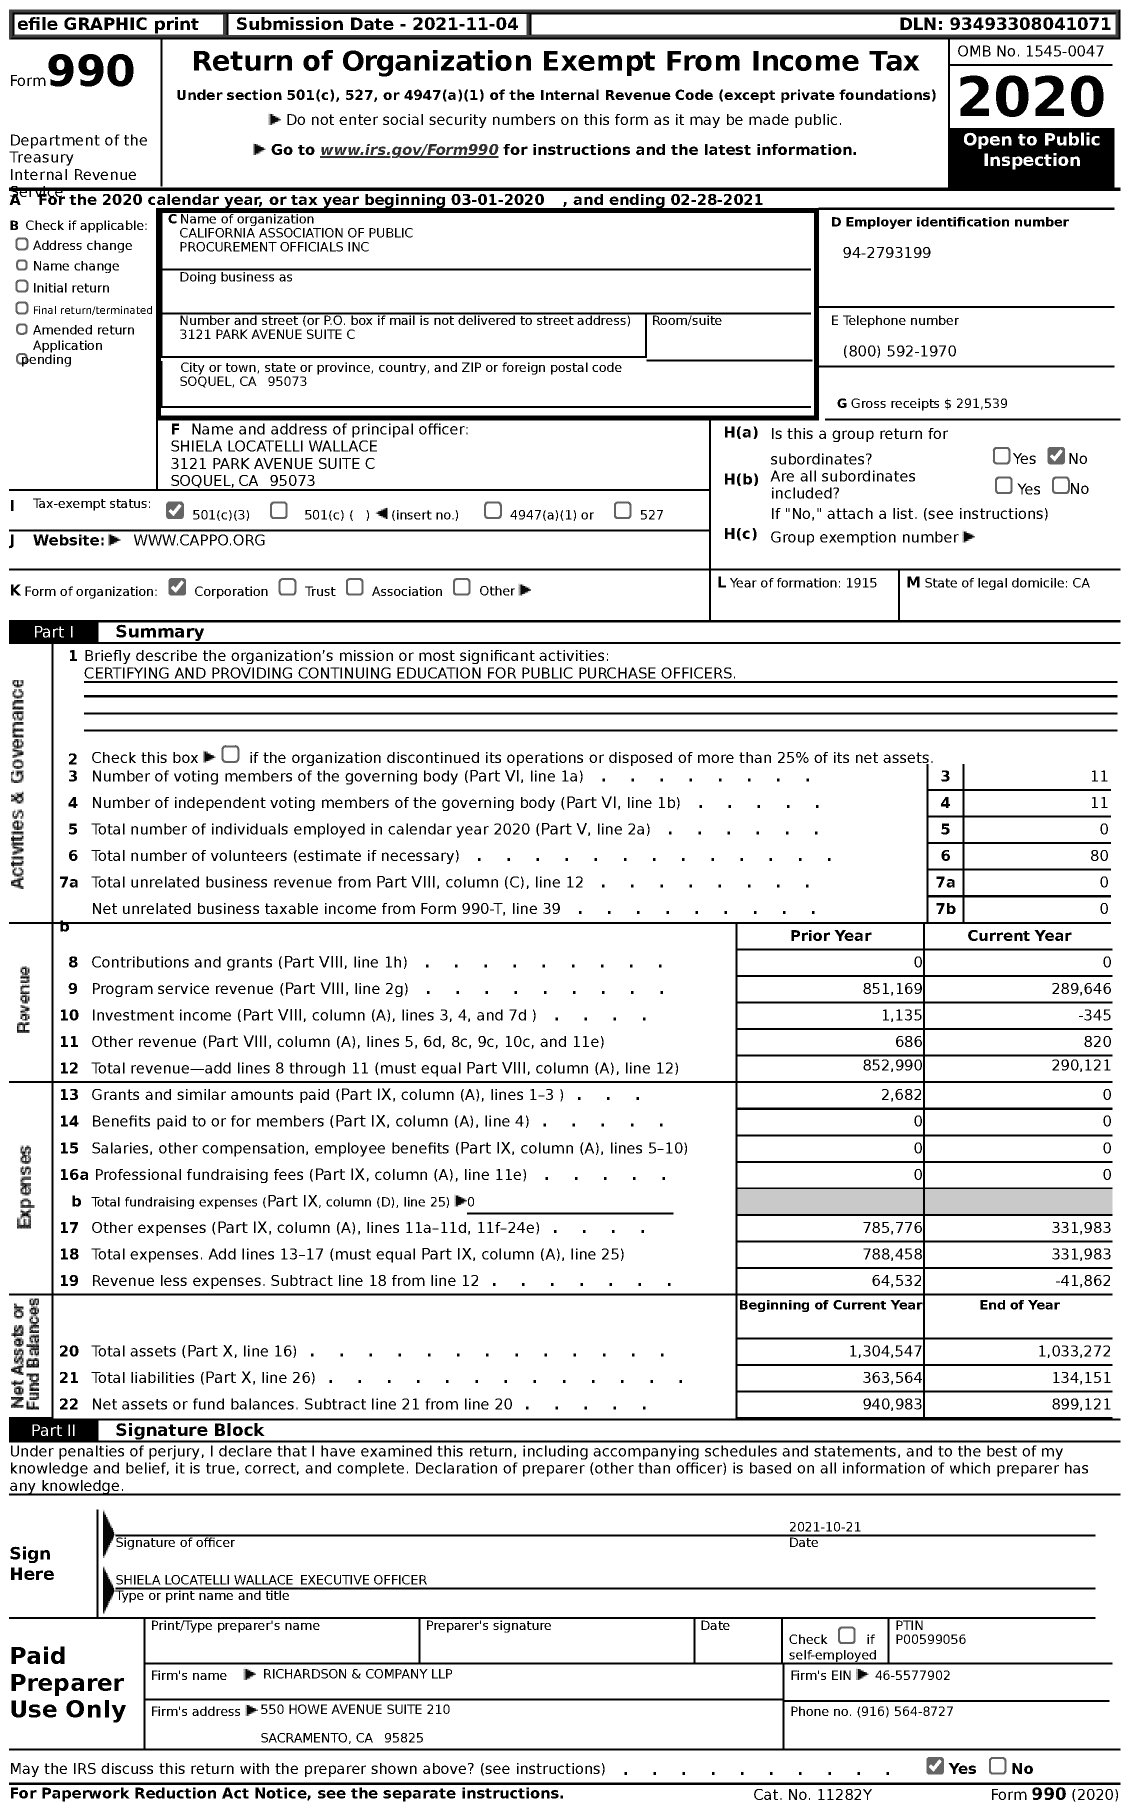 Image of first page of 2020 Form 990 for California Association of Public Procurement Officials